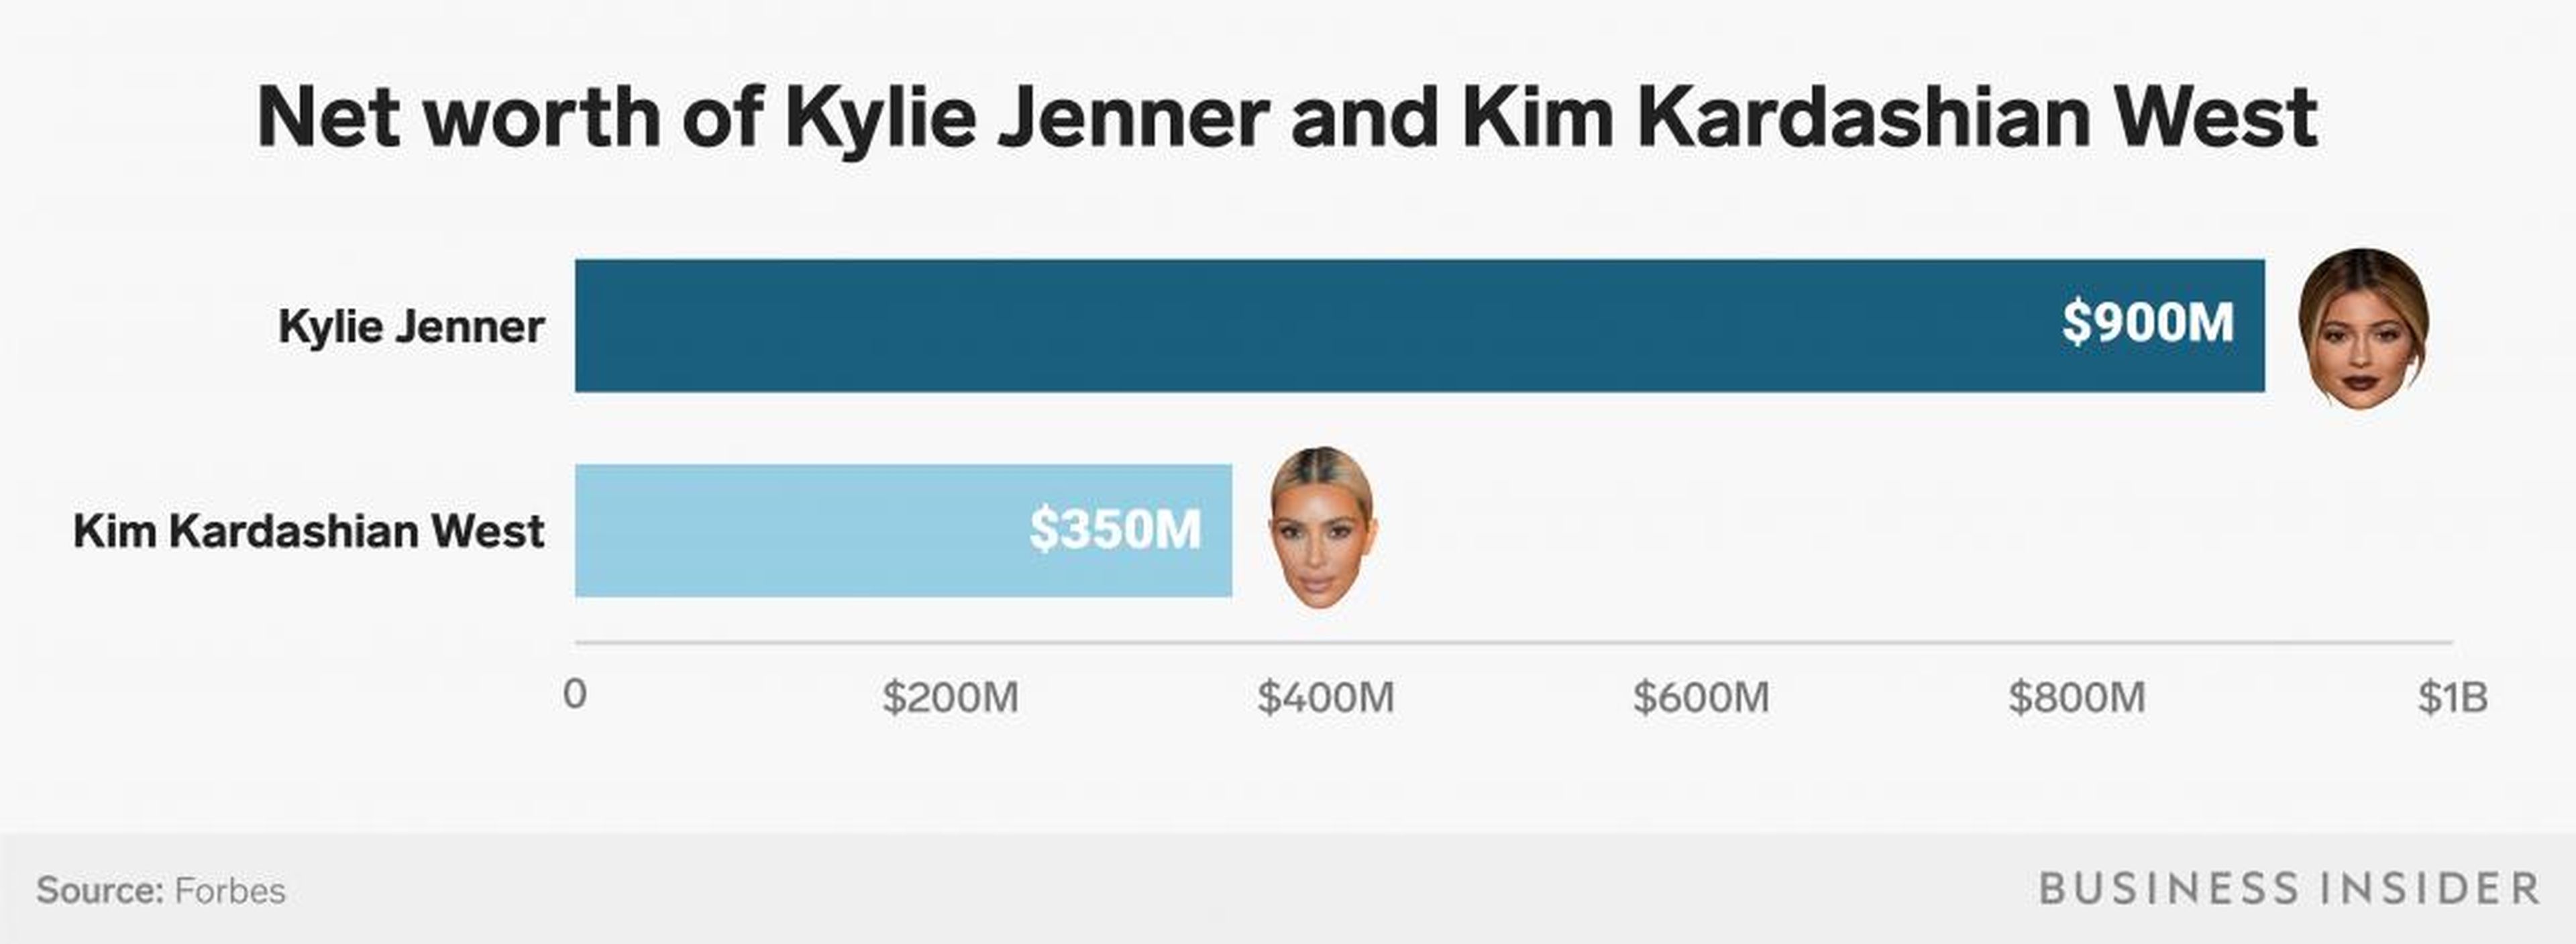 Kylie Jenner is on the cusp of becoming the world's youngest self-made billionaire, with Forbes estimating her net worth to be 3 times as large as Kim Kardashian's